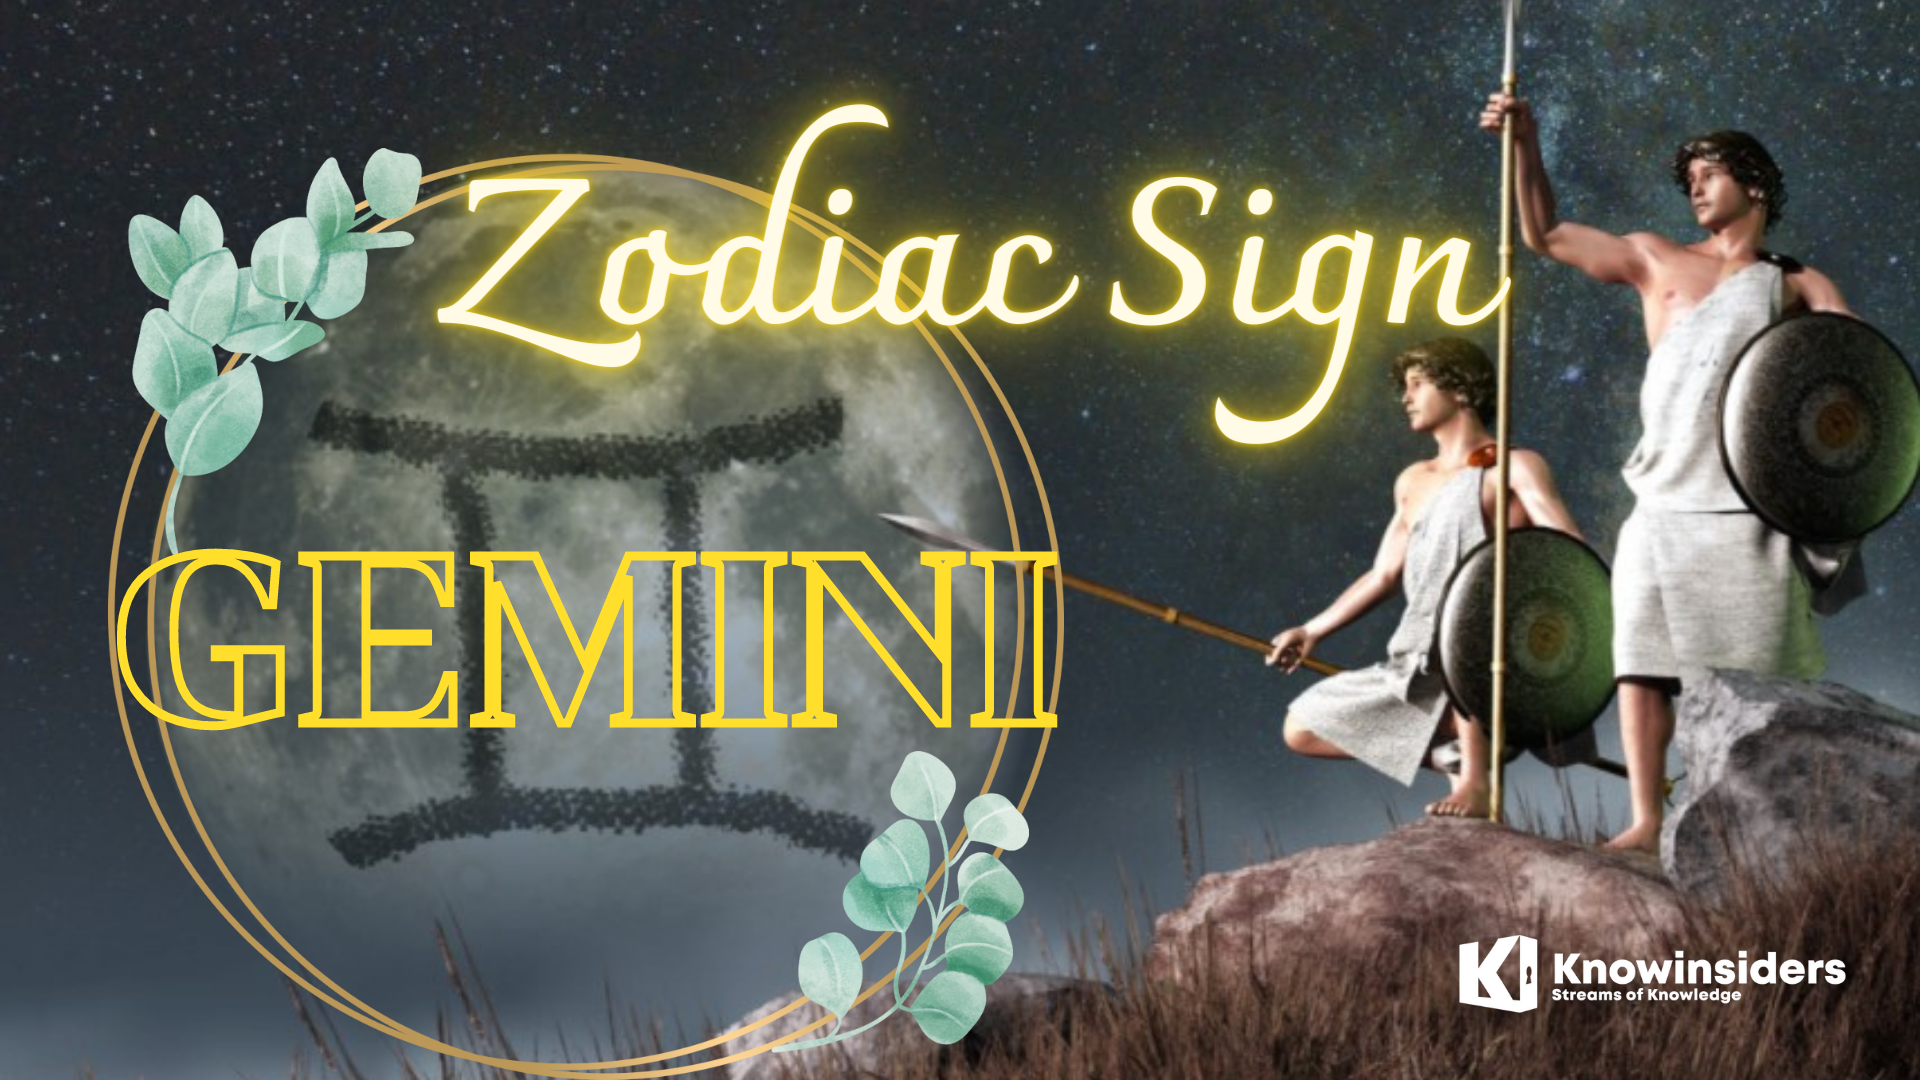 GEMINI Zodiac Sign: BirthDay, Meaning and Personal Traits